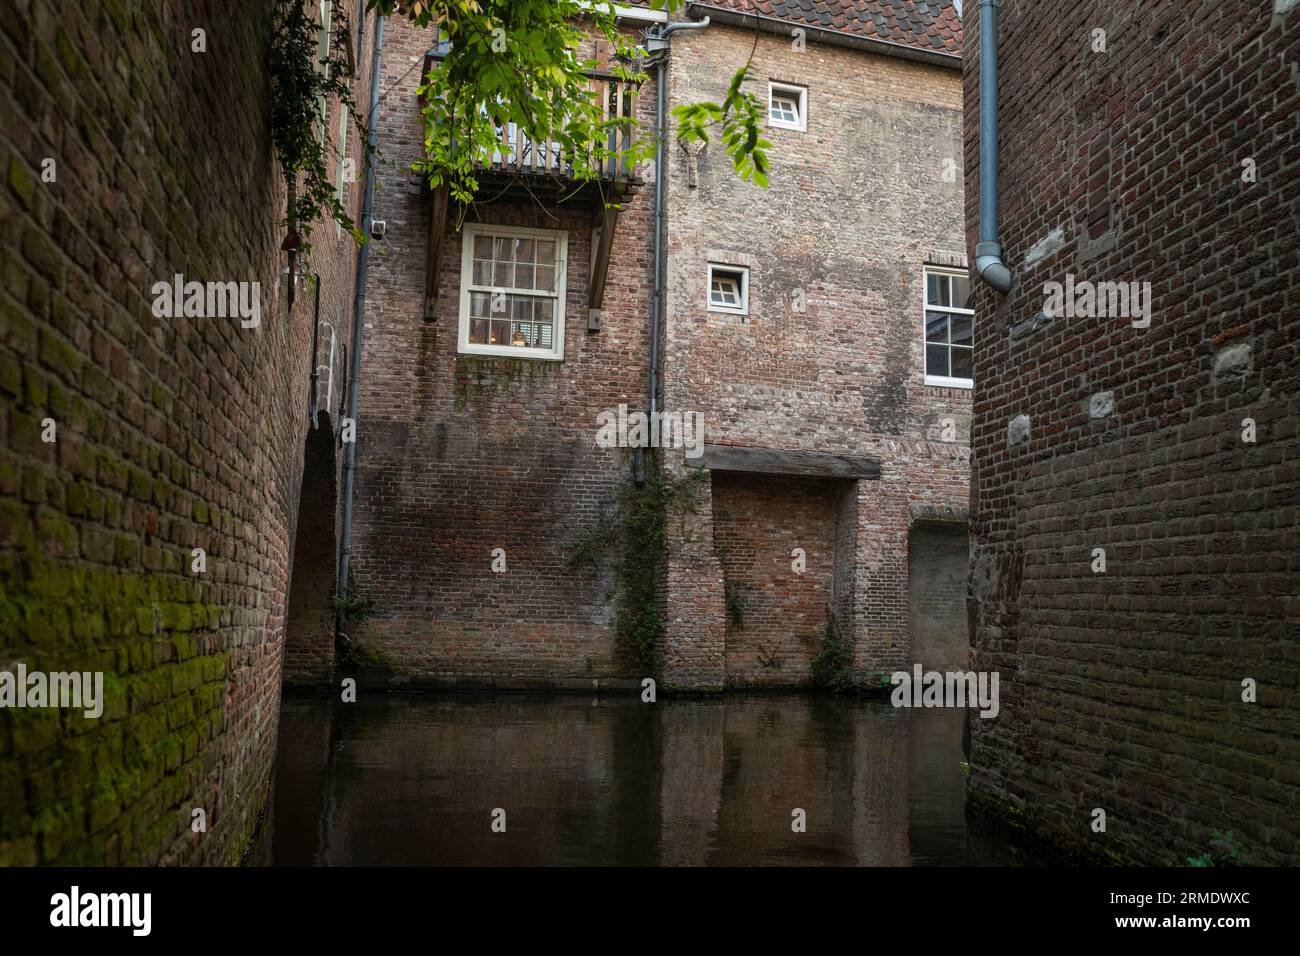 Boat trip in the medieval historical inner city of den Bosch, Netherlands Stock Photo